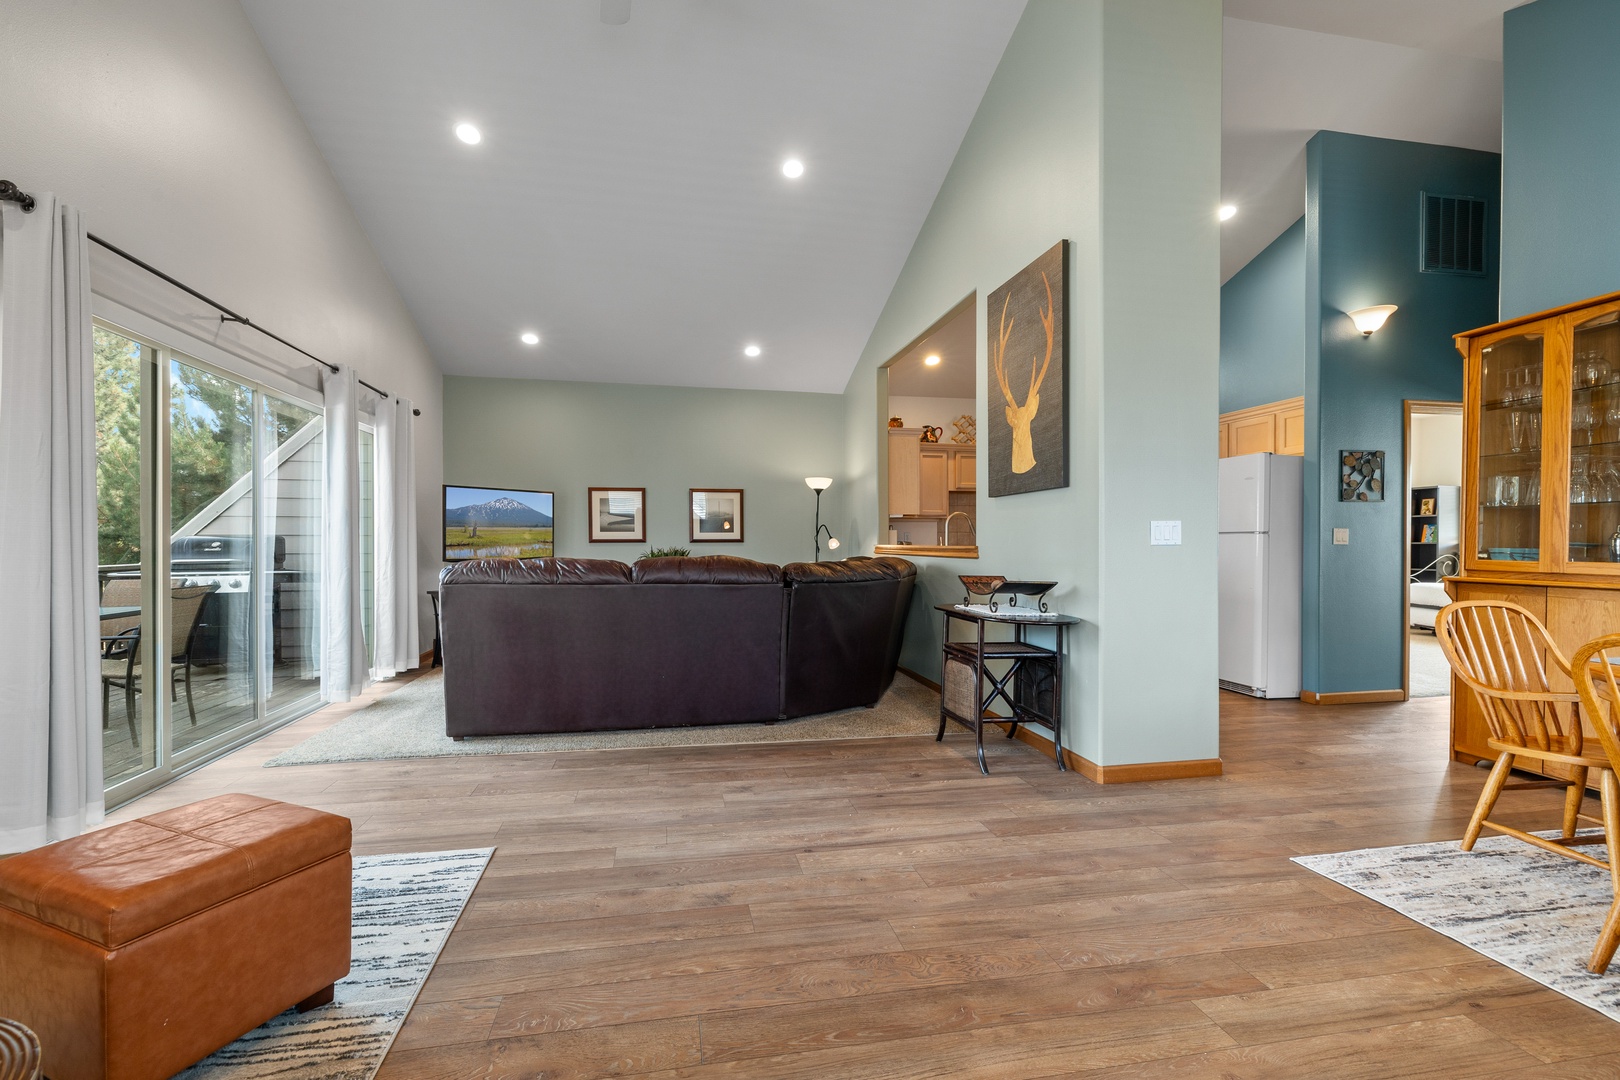 Enjoy the breezy, open layout in the main living room area